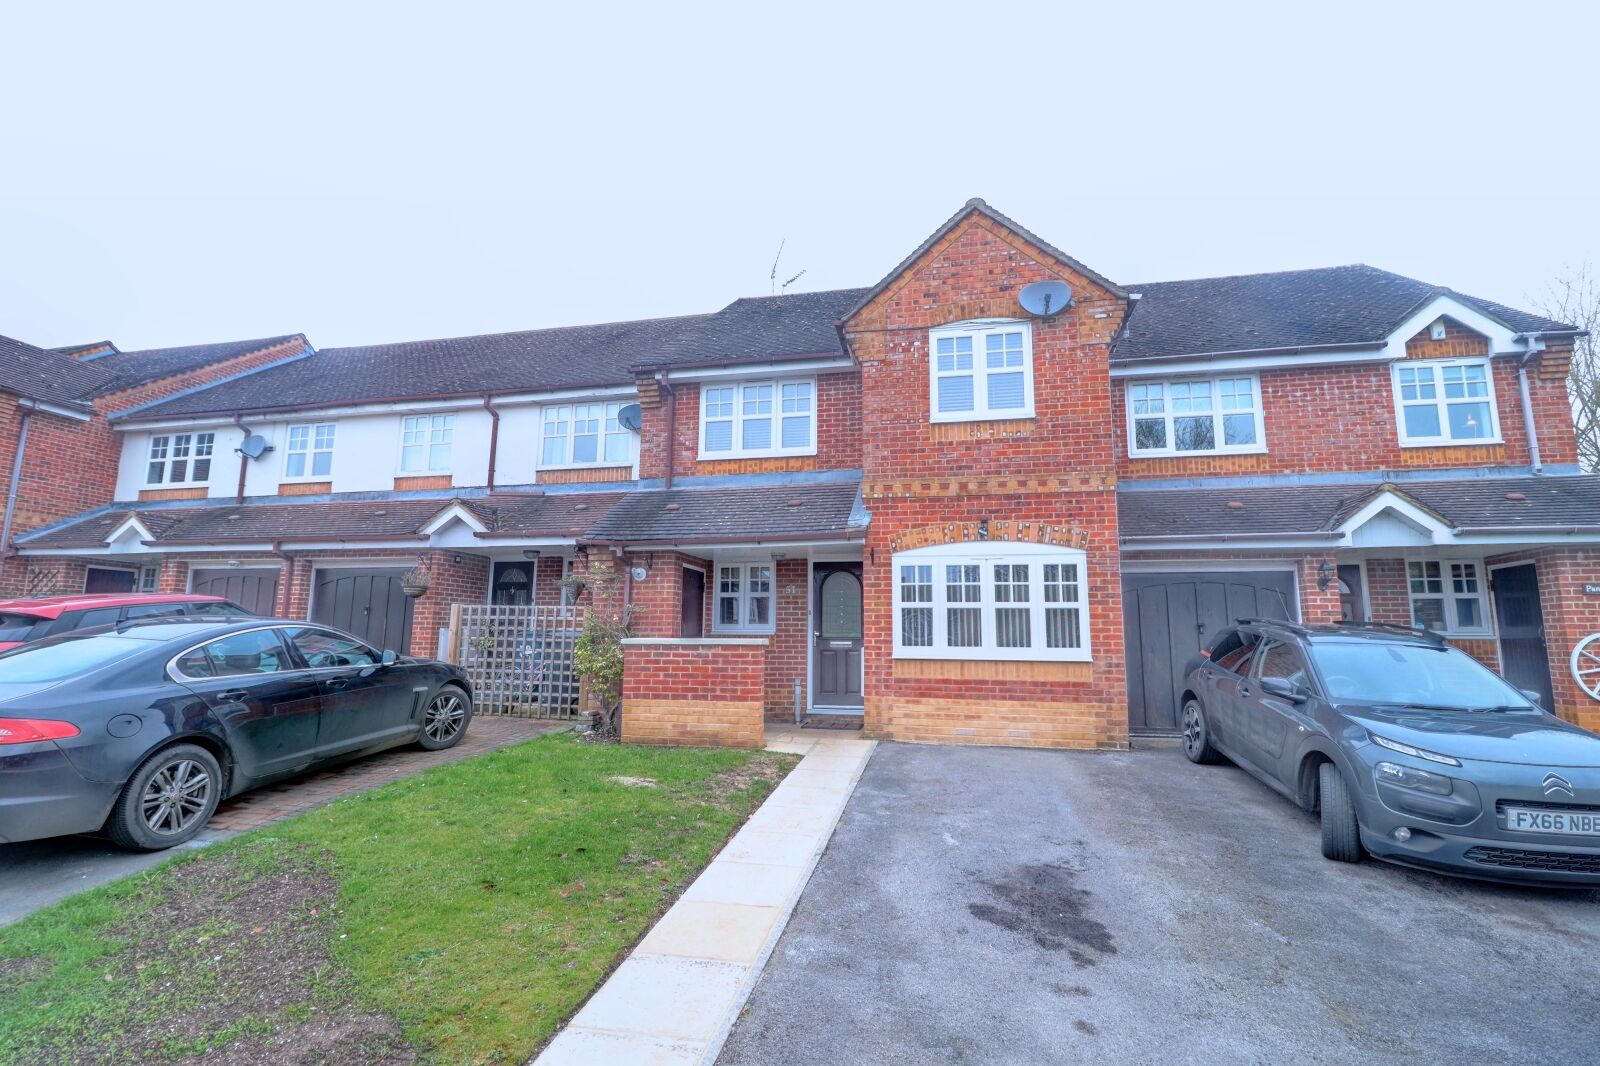 3 bedroom mid terraced house to rent, Available now Saunderton Vale, Saunderton, HP14, main image